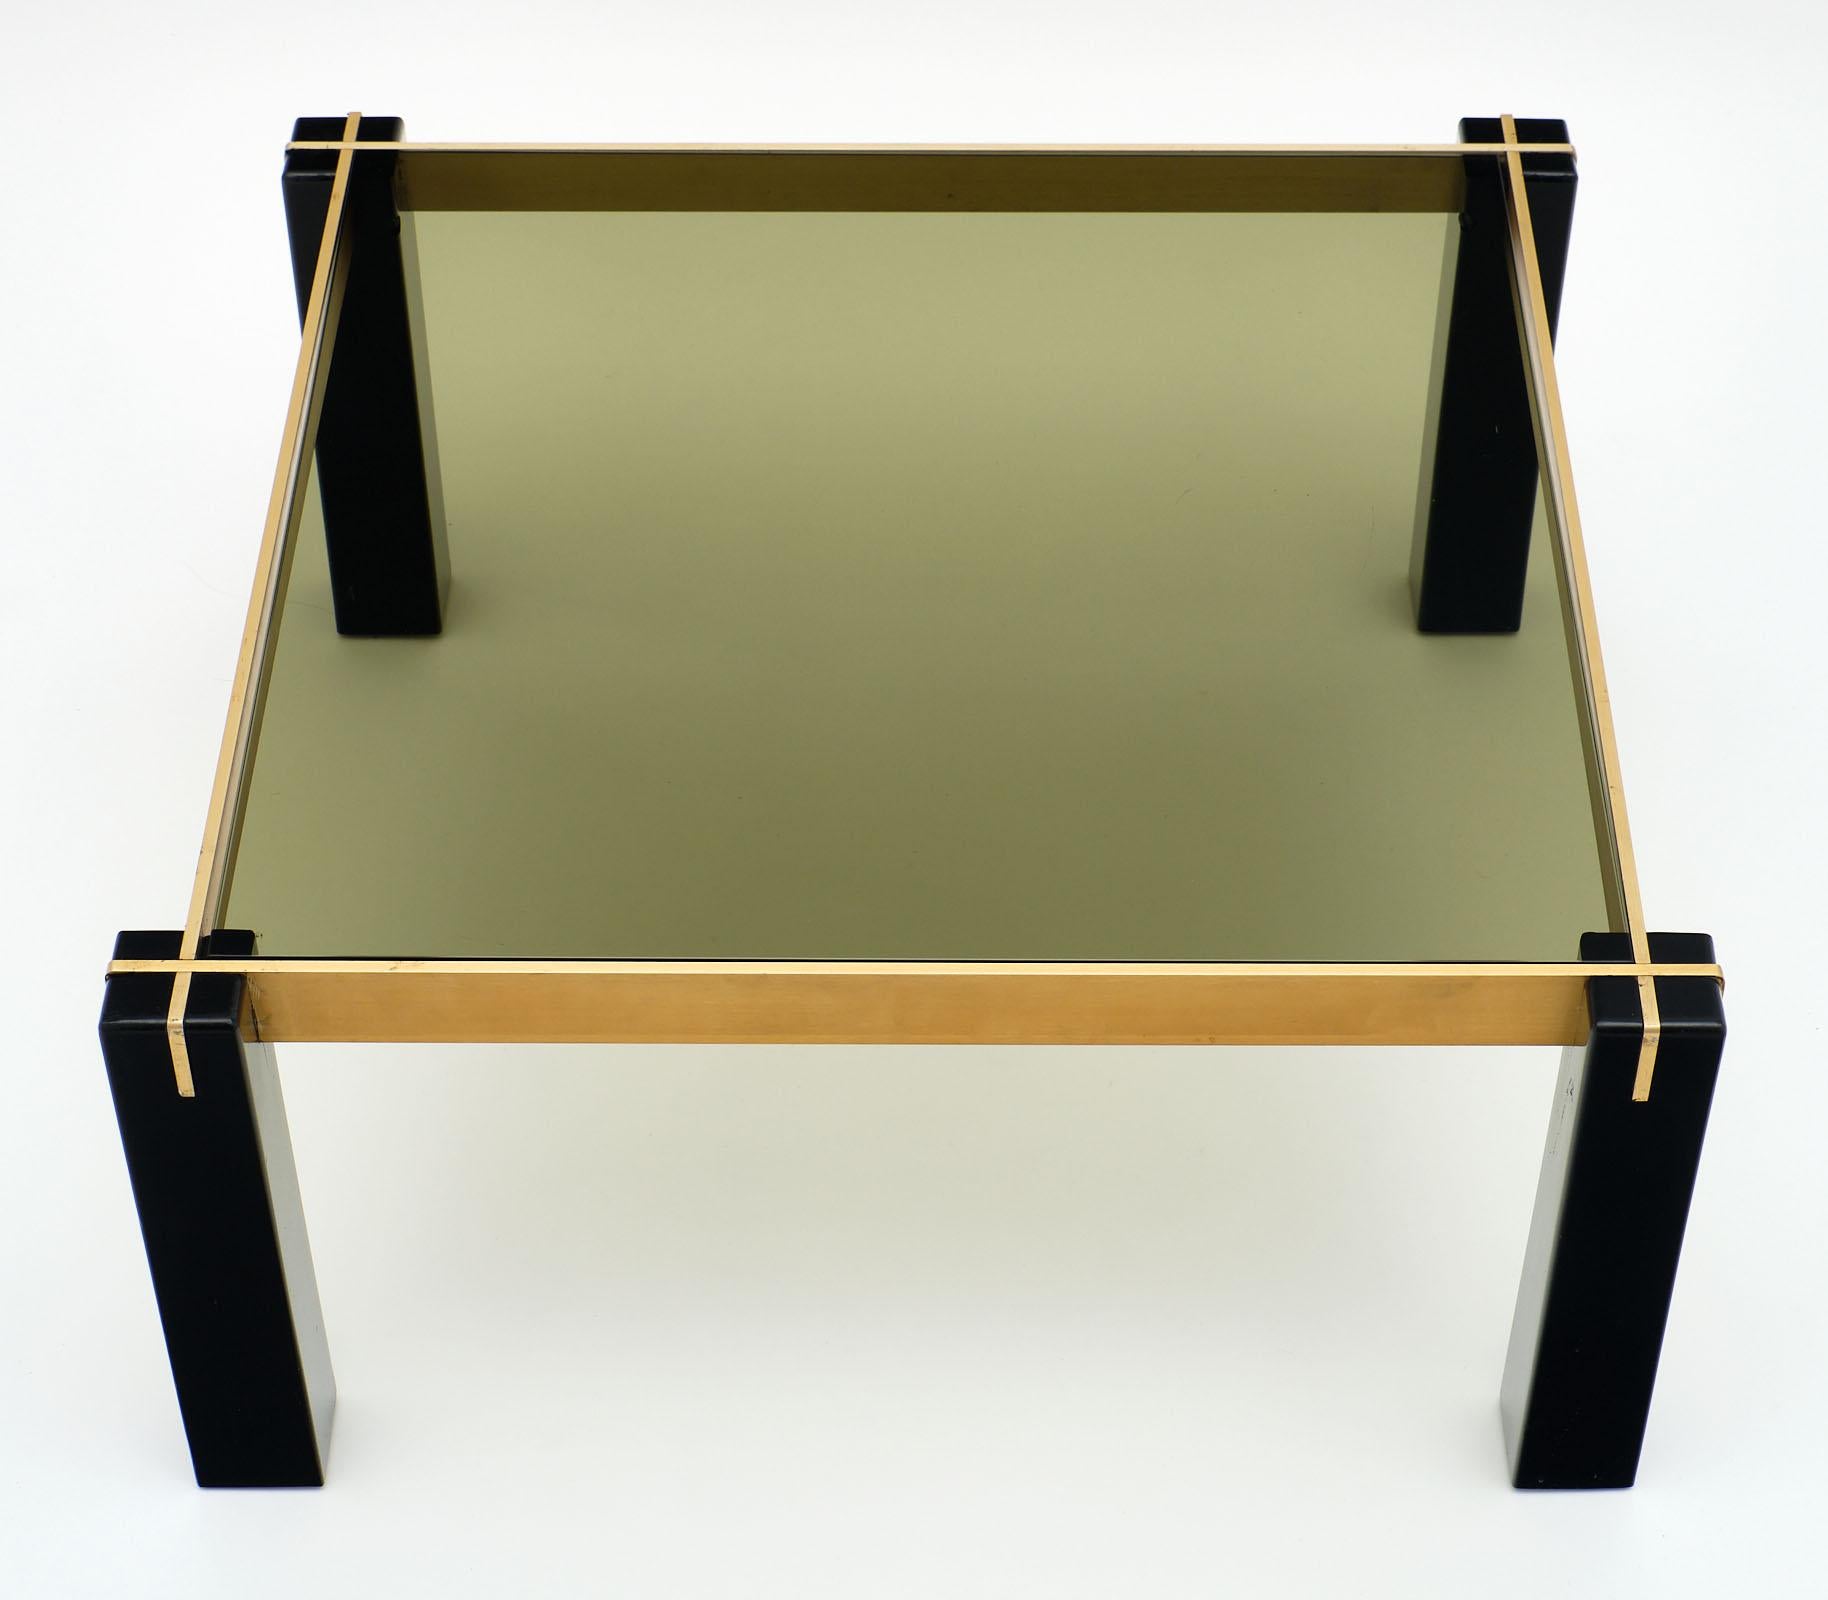 French modernist brass and black side tables with vintage square section legs and inserted metal structure holding the smoked glass. We love the strong construction and contrast of the brass and ebonized legs.